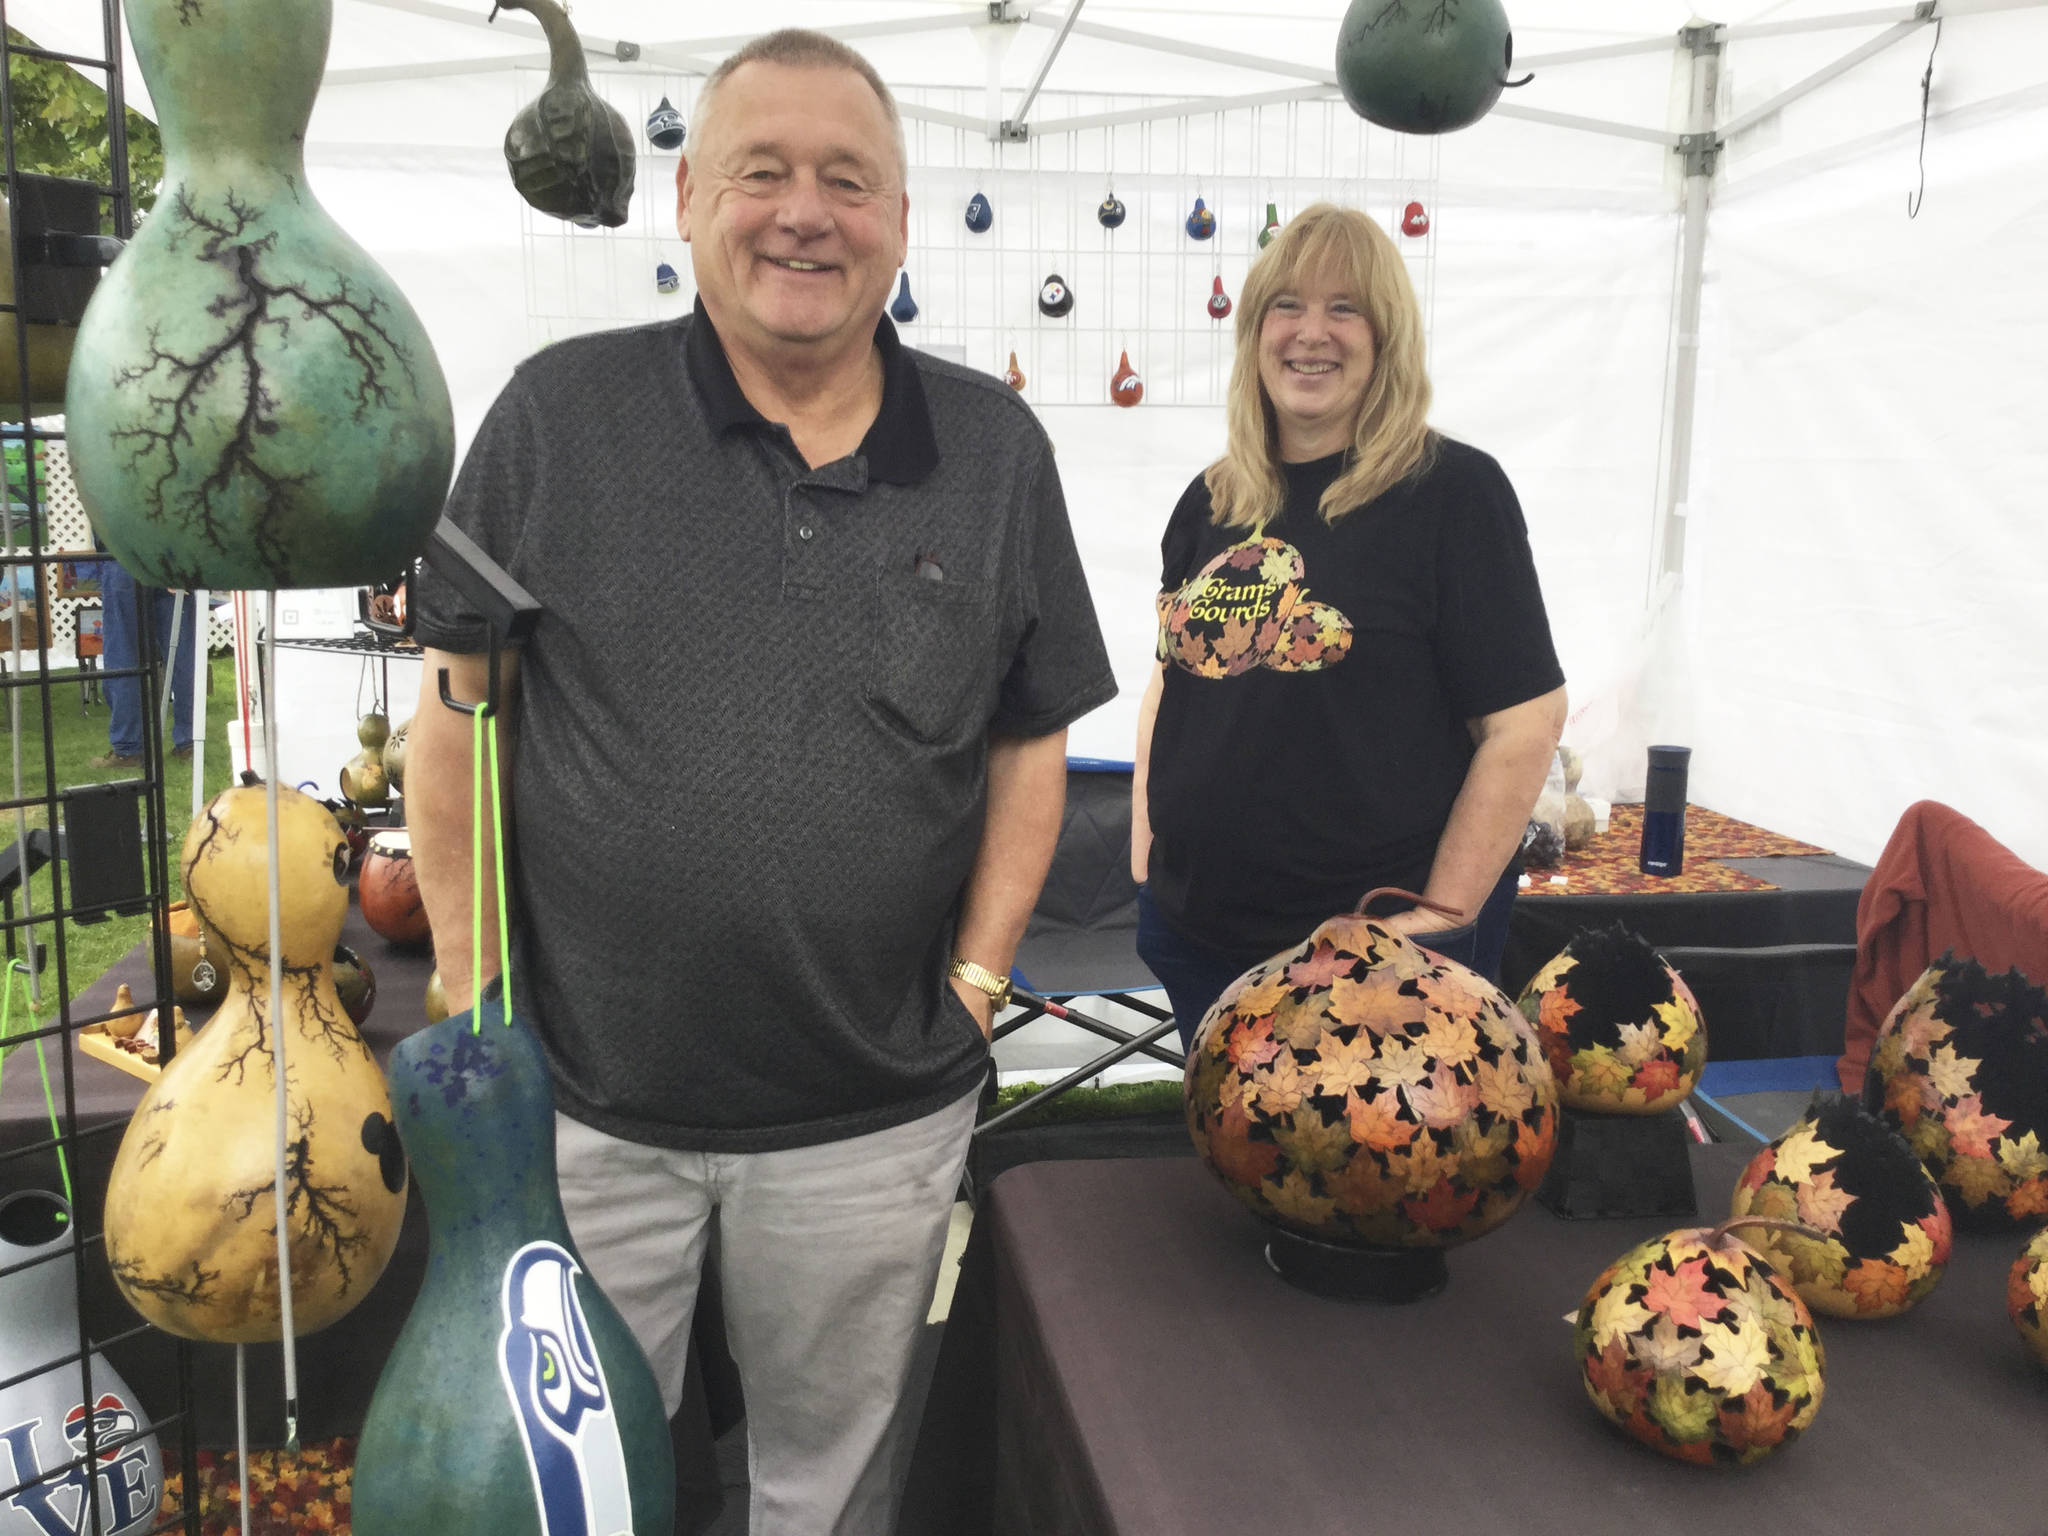 Grams Gourds owner Nancy Wilson and husband, Joe, Marysville, sold their intricate hand-carved gourds at the Art in Legion Park event over the weekend.